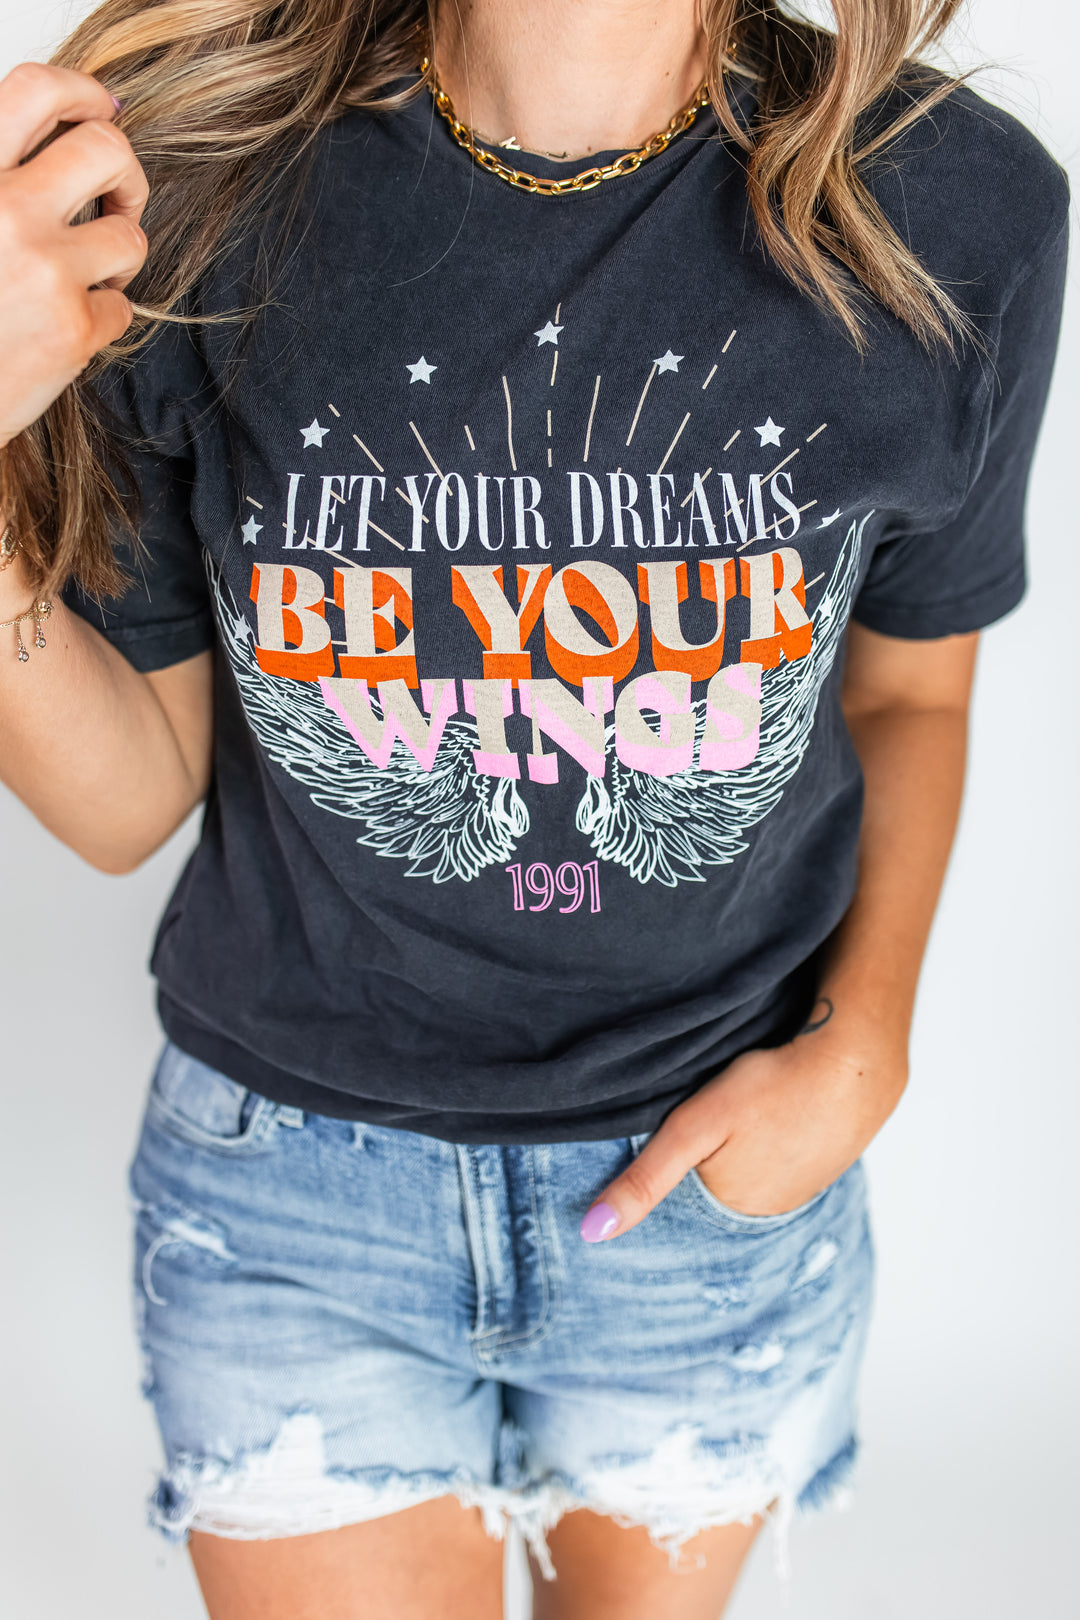 The Be Your Wings Tee